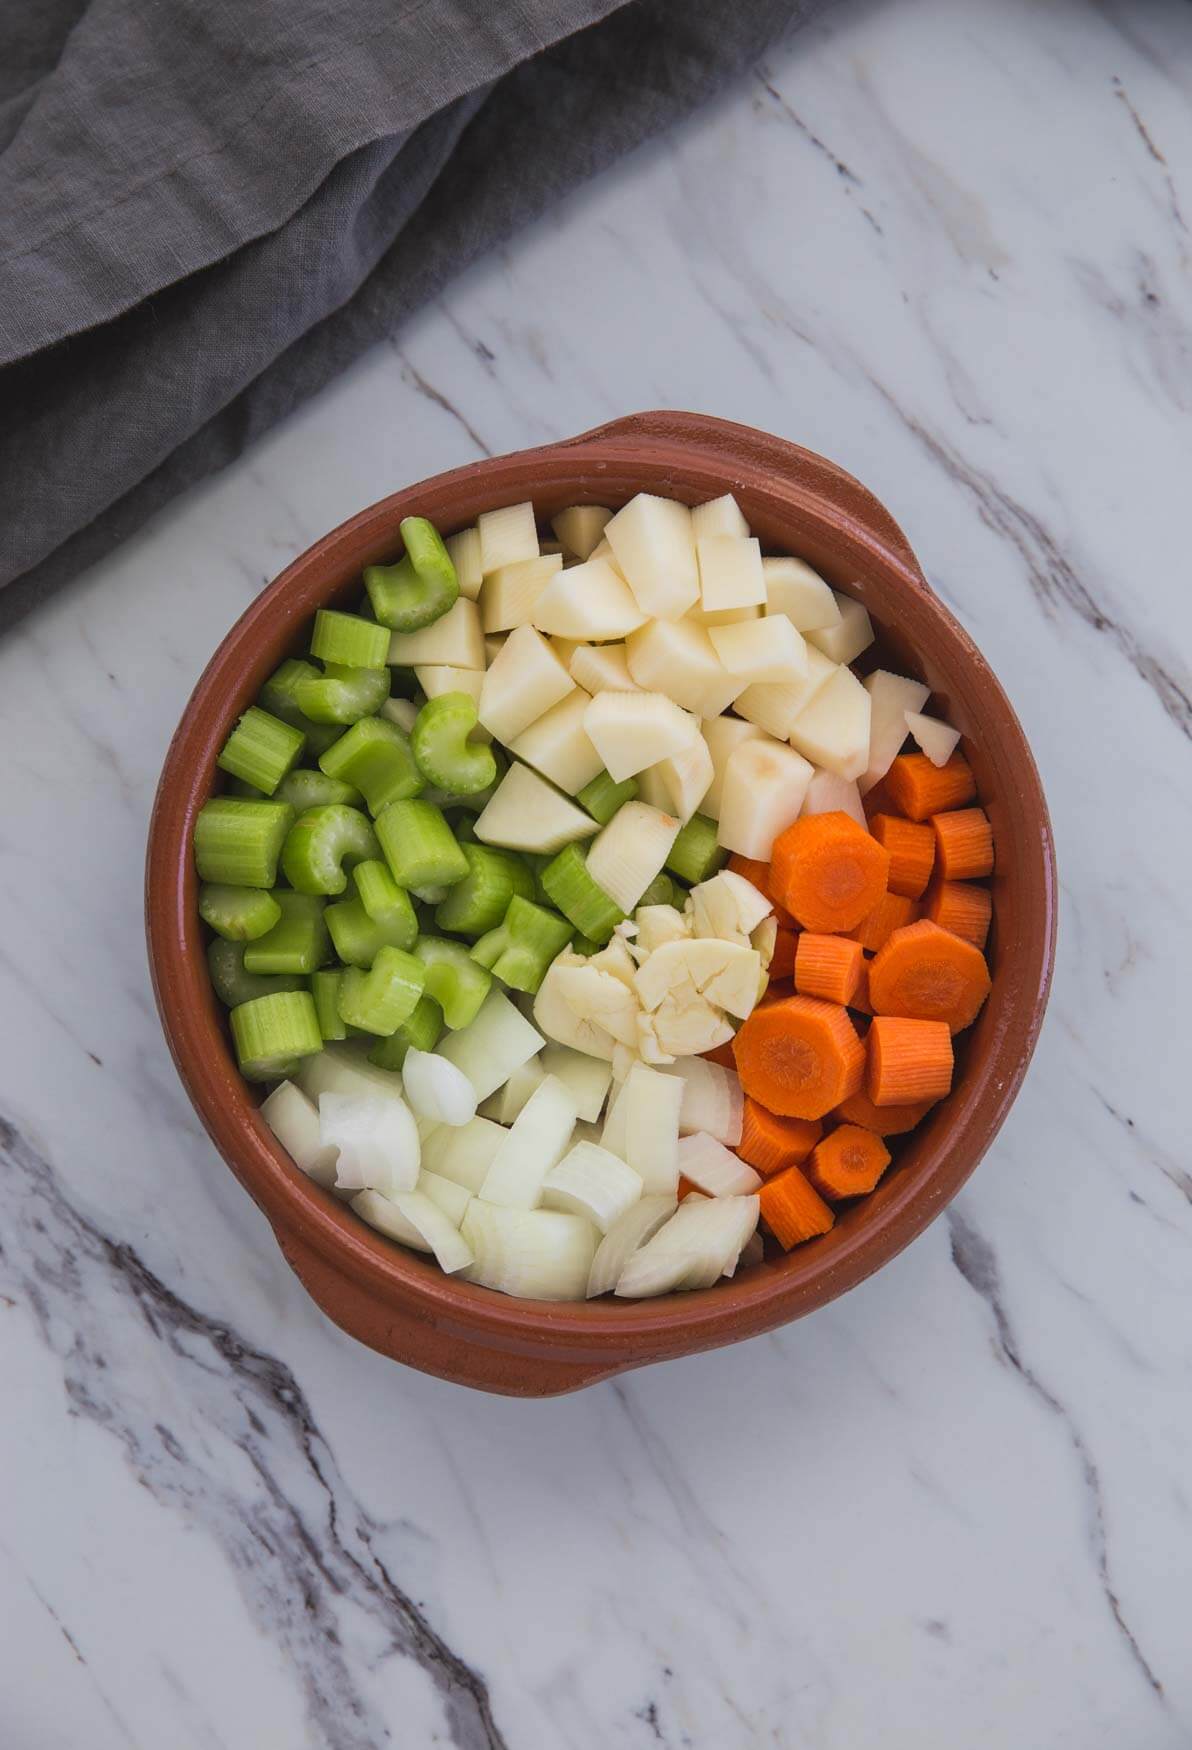 diced vegetables in a shallow bowl for making broccoli soup